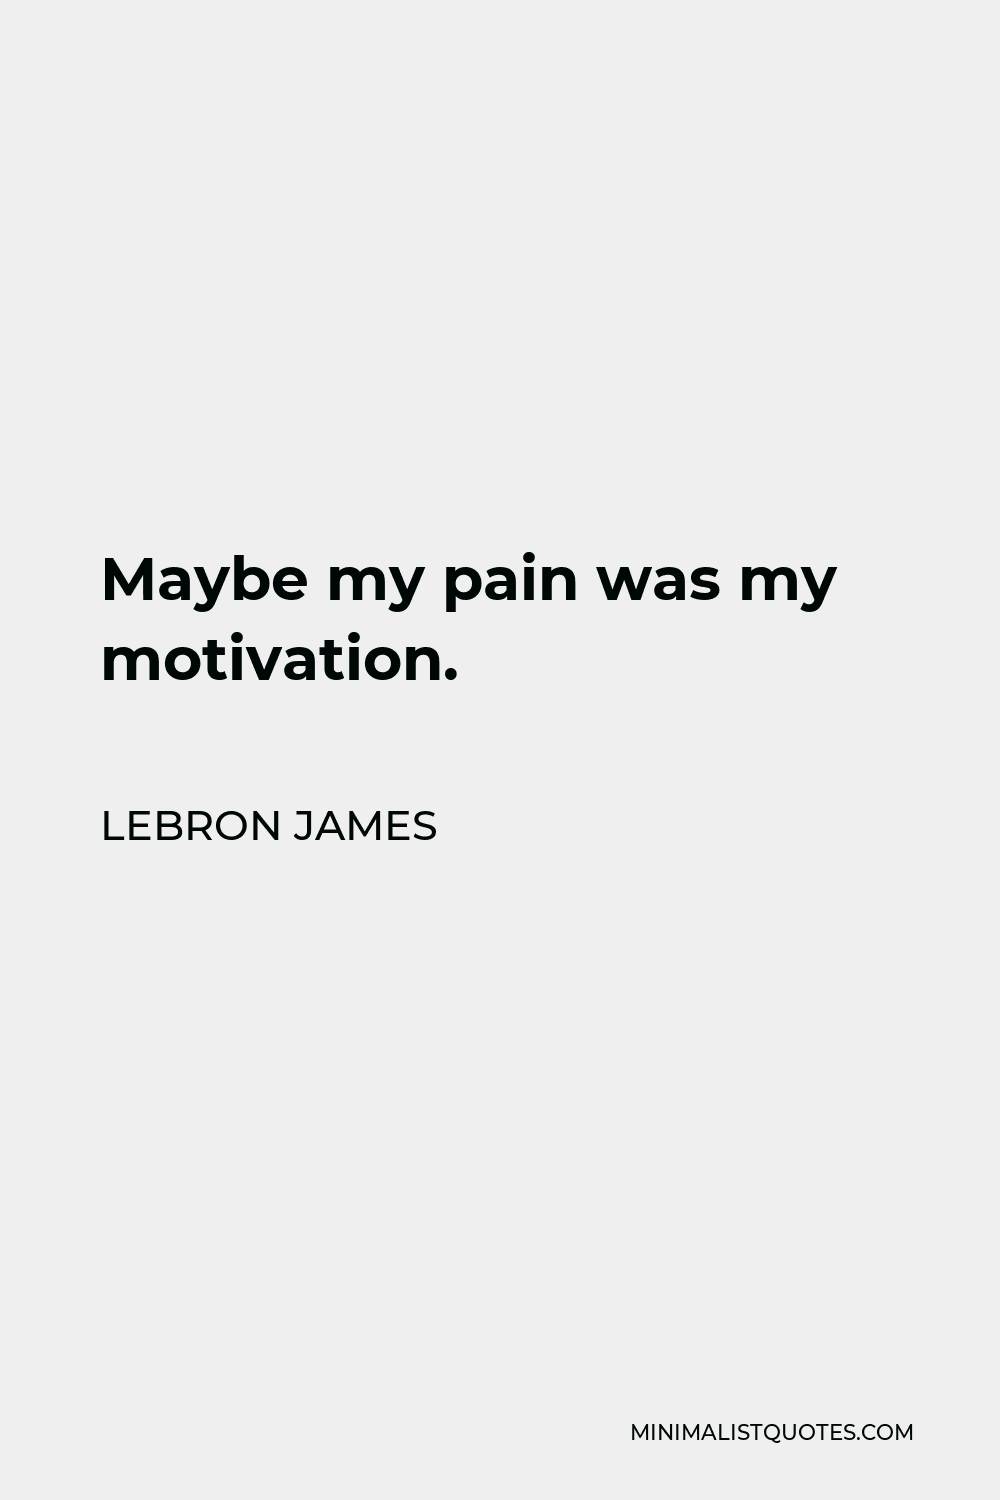 LeBron James Quote - Maybe my pain was my motivation.